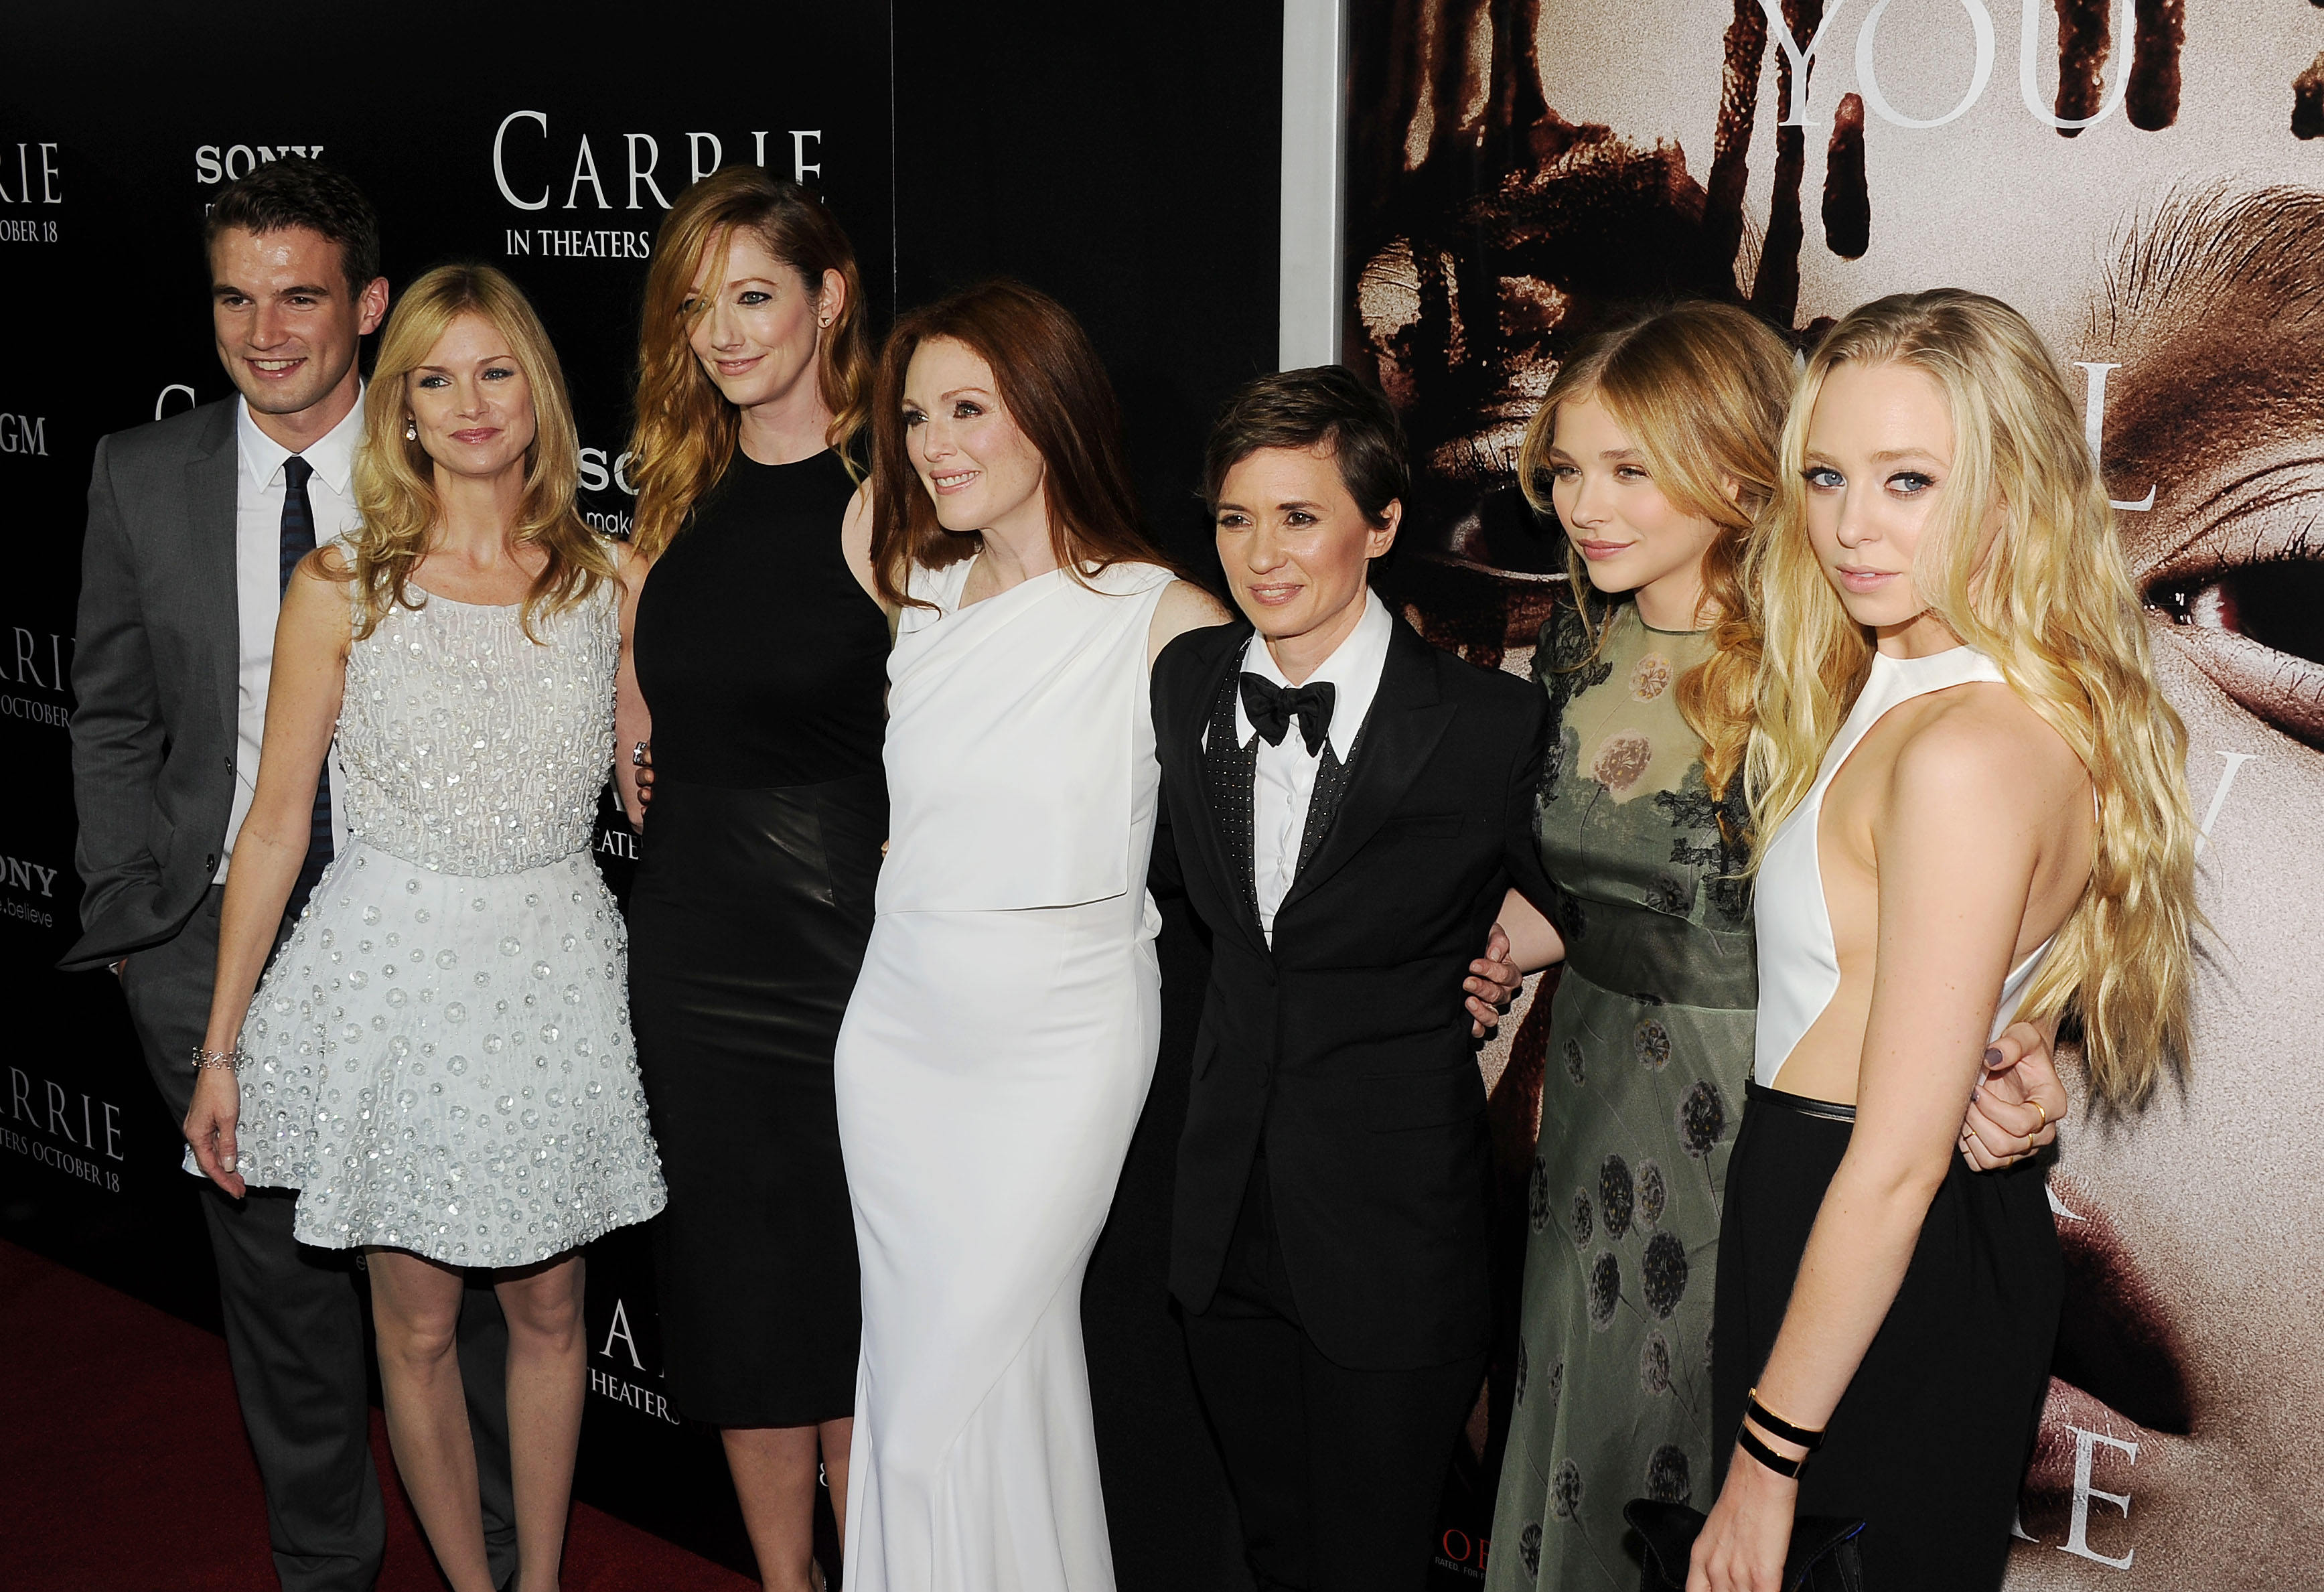 Alex Russell, Cynthia Preston, Judy Greer, Julianne Moore, director Kimberly Pierce, actors Chloe Grace Moretz, Portia Doubleday attend the premiere of "Carrie" at ArcLight Hollywood on October 7, 2013, in Hollywood, California. | Source: Getty Images